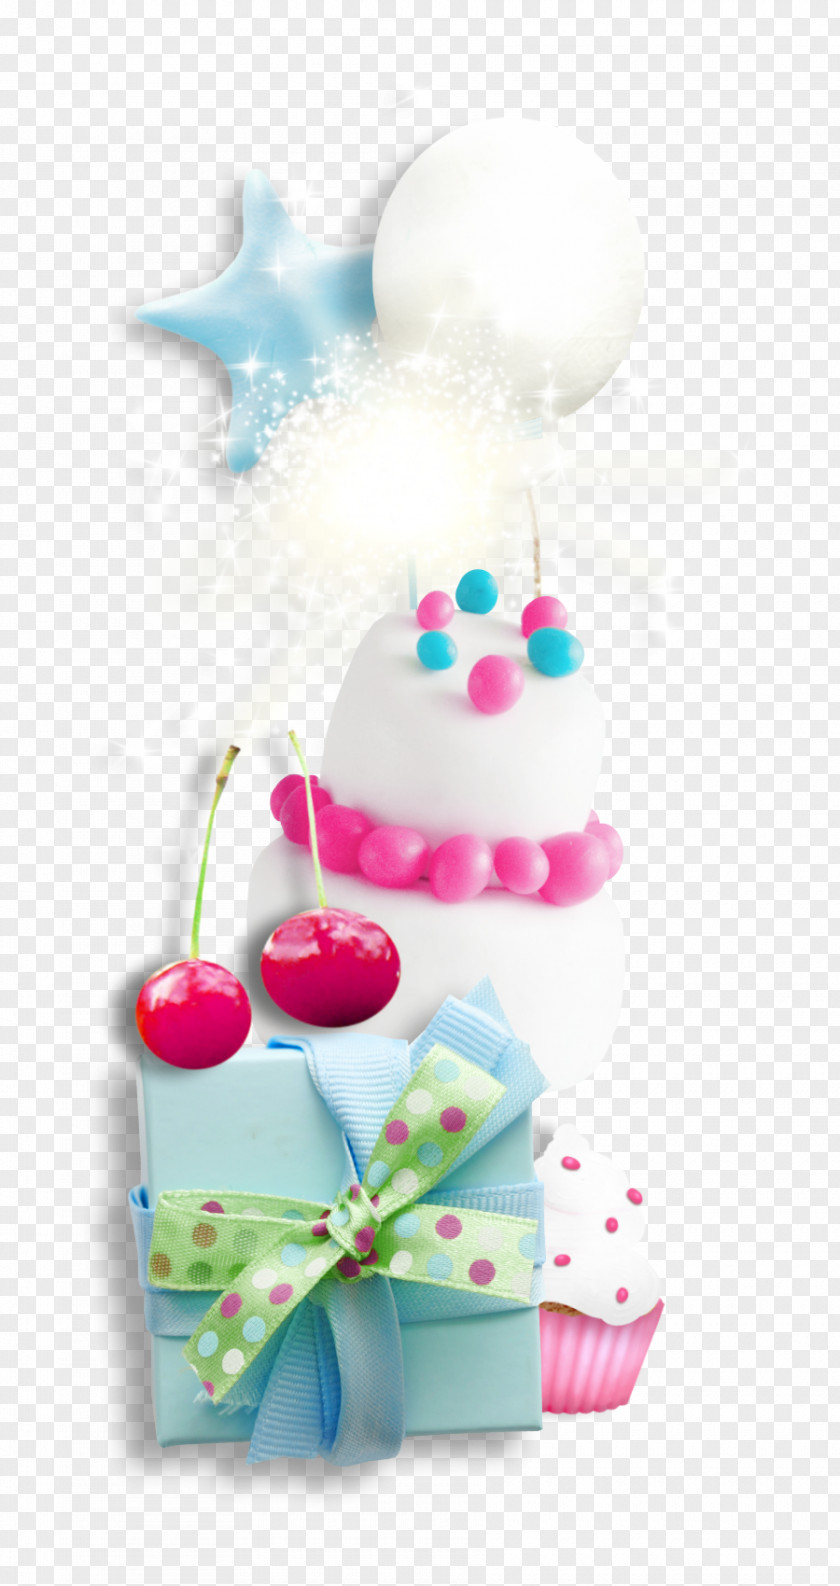 The Stars Balloon Gift PNG